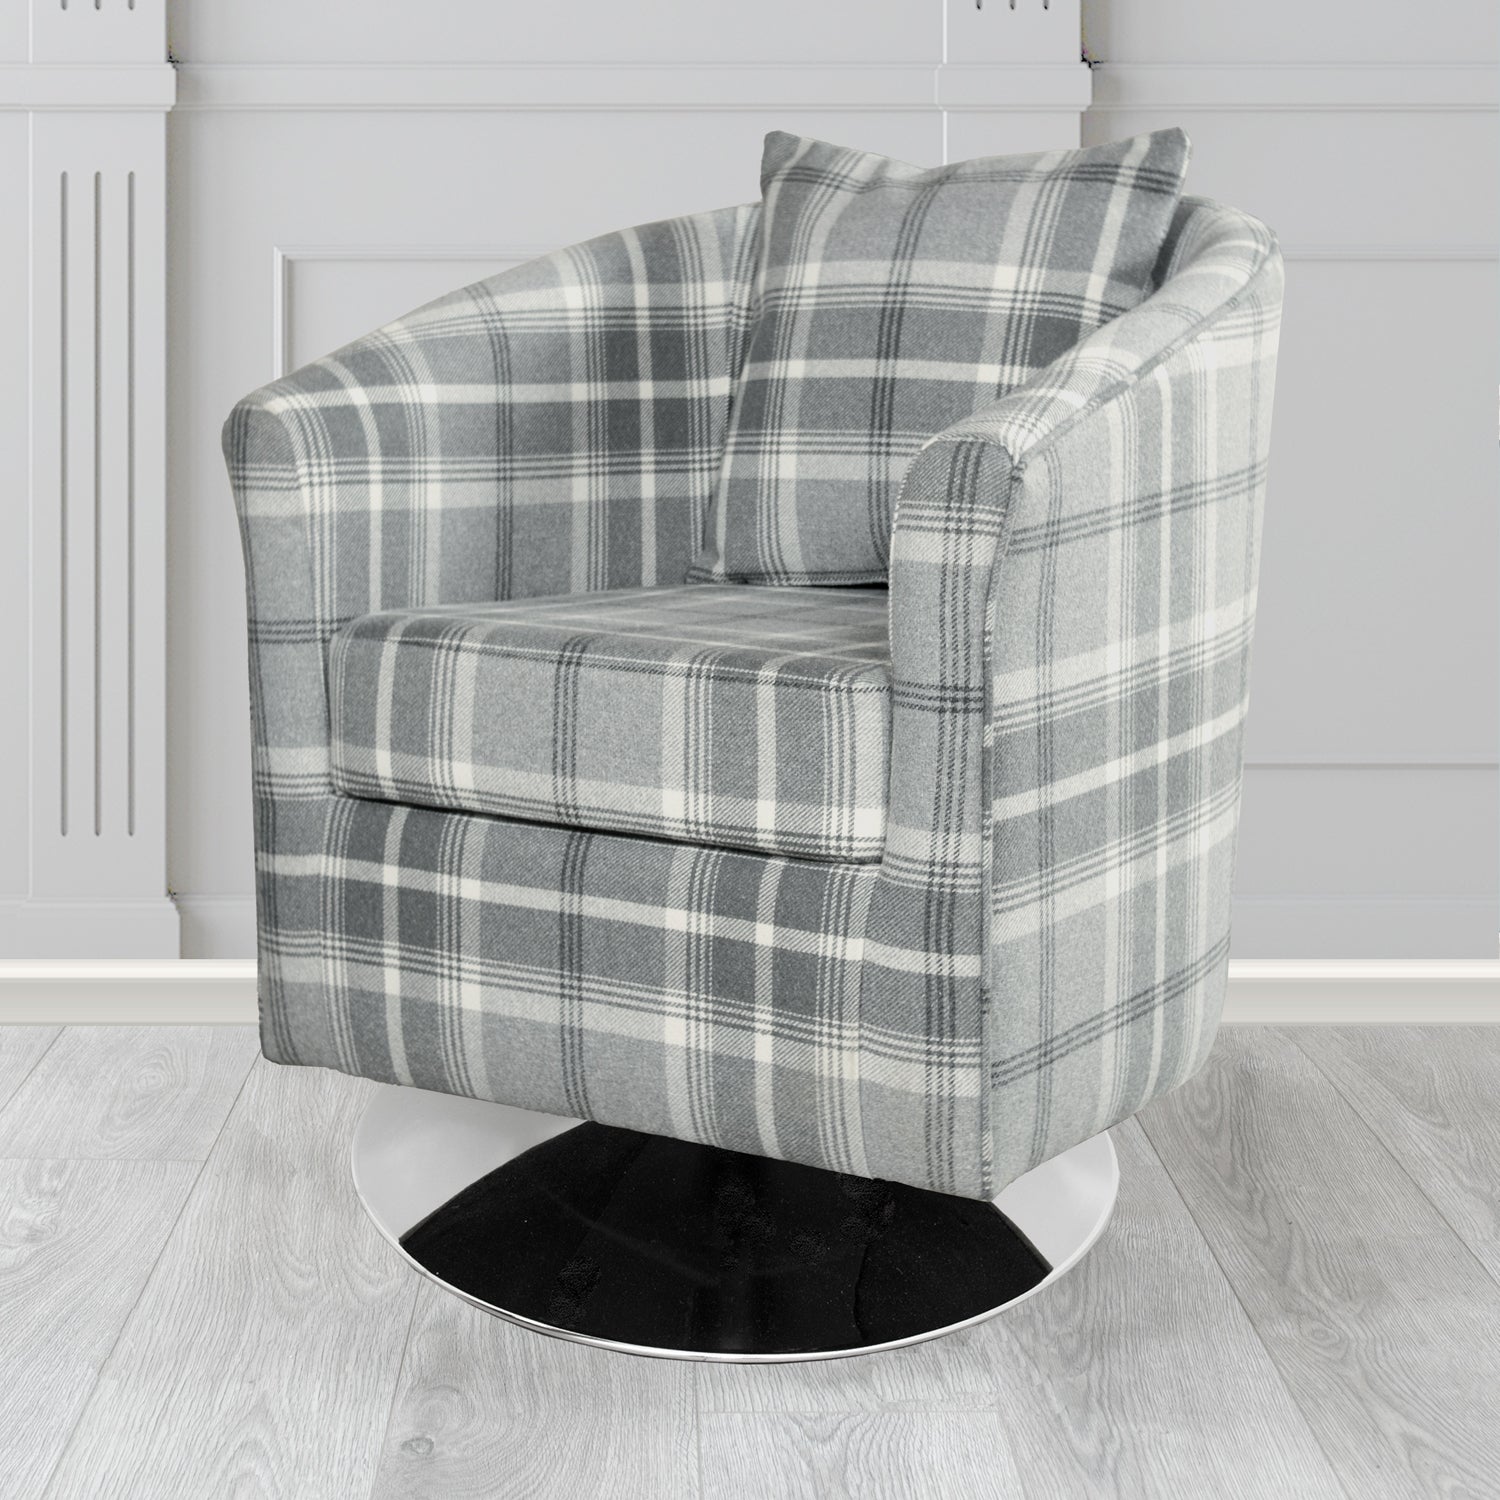 St Tropez Balmoral Dove Grey Check Tartan Fabric Swivel Tub Chair with Scatter Cushion (6627071164458)